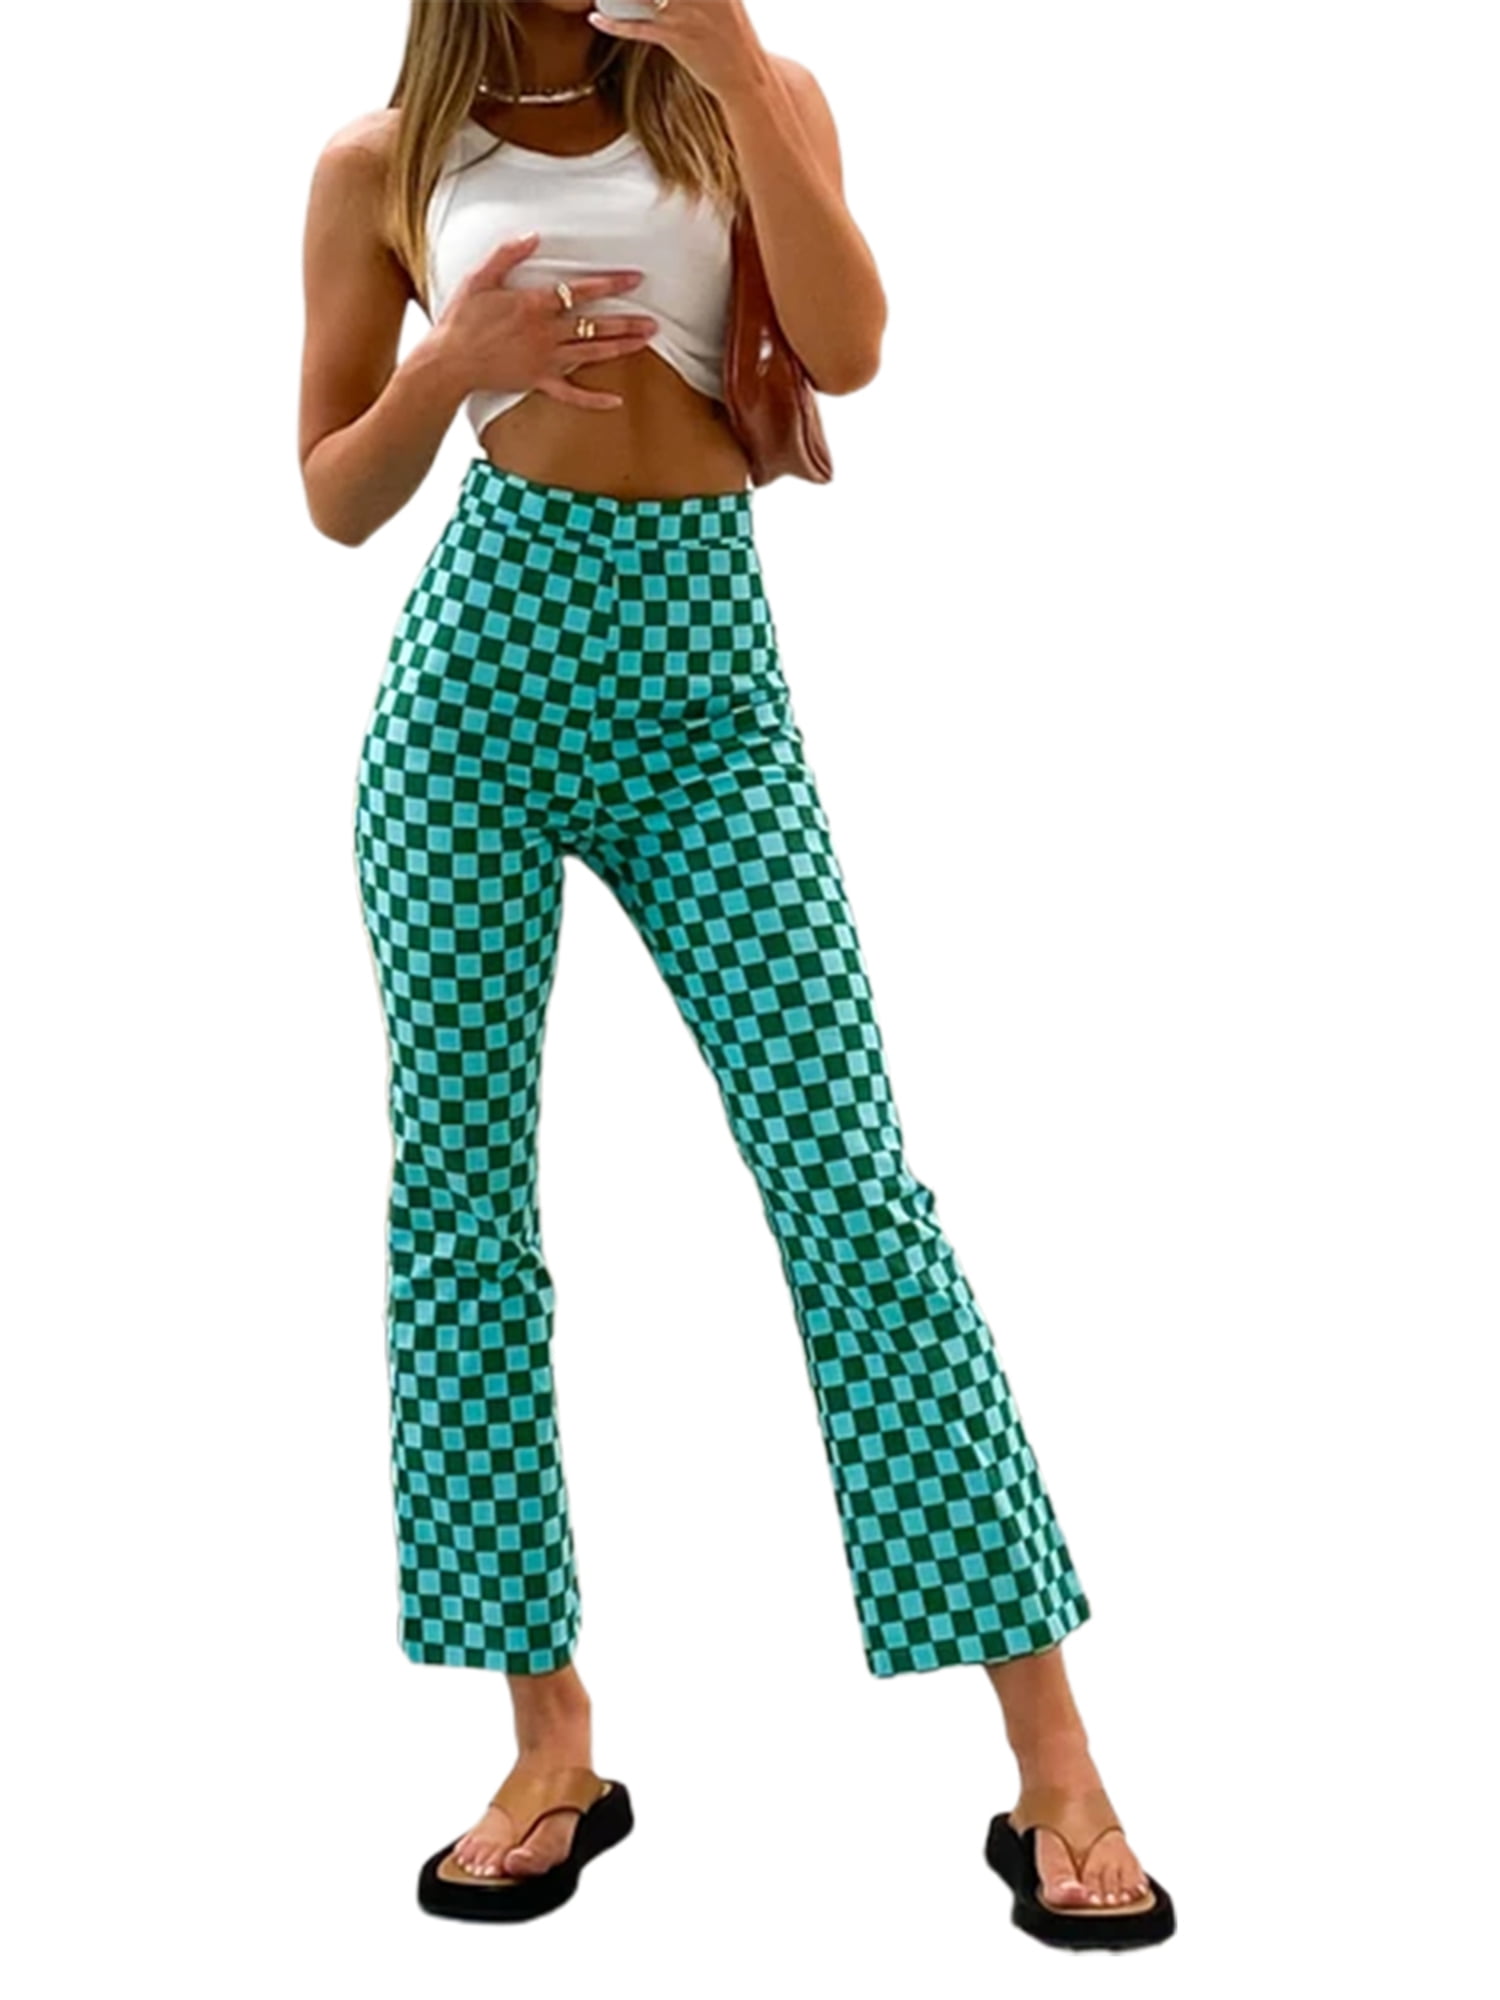 Buy chex pants for girls in India @ Limeroad